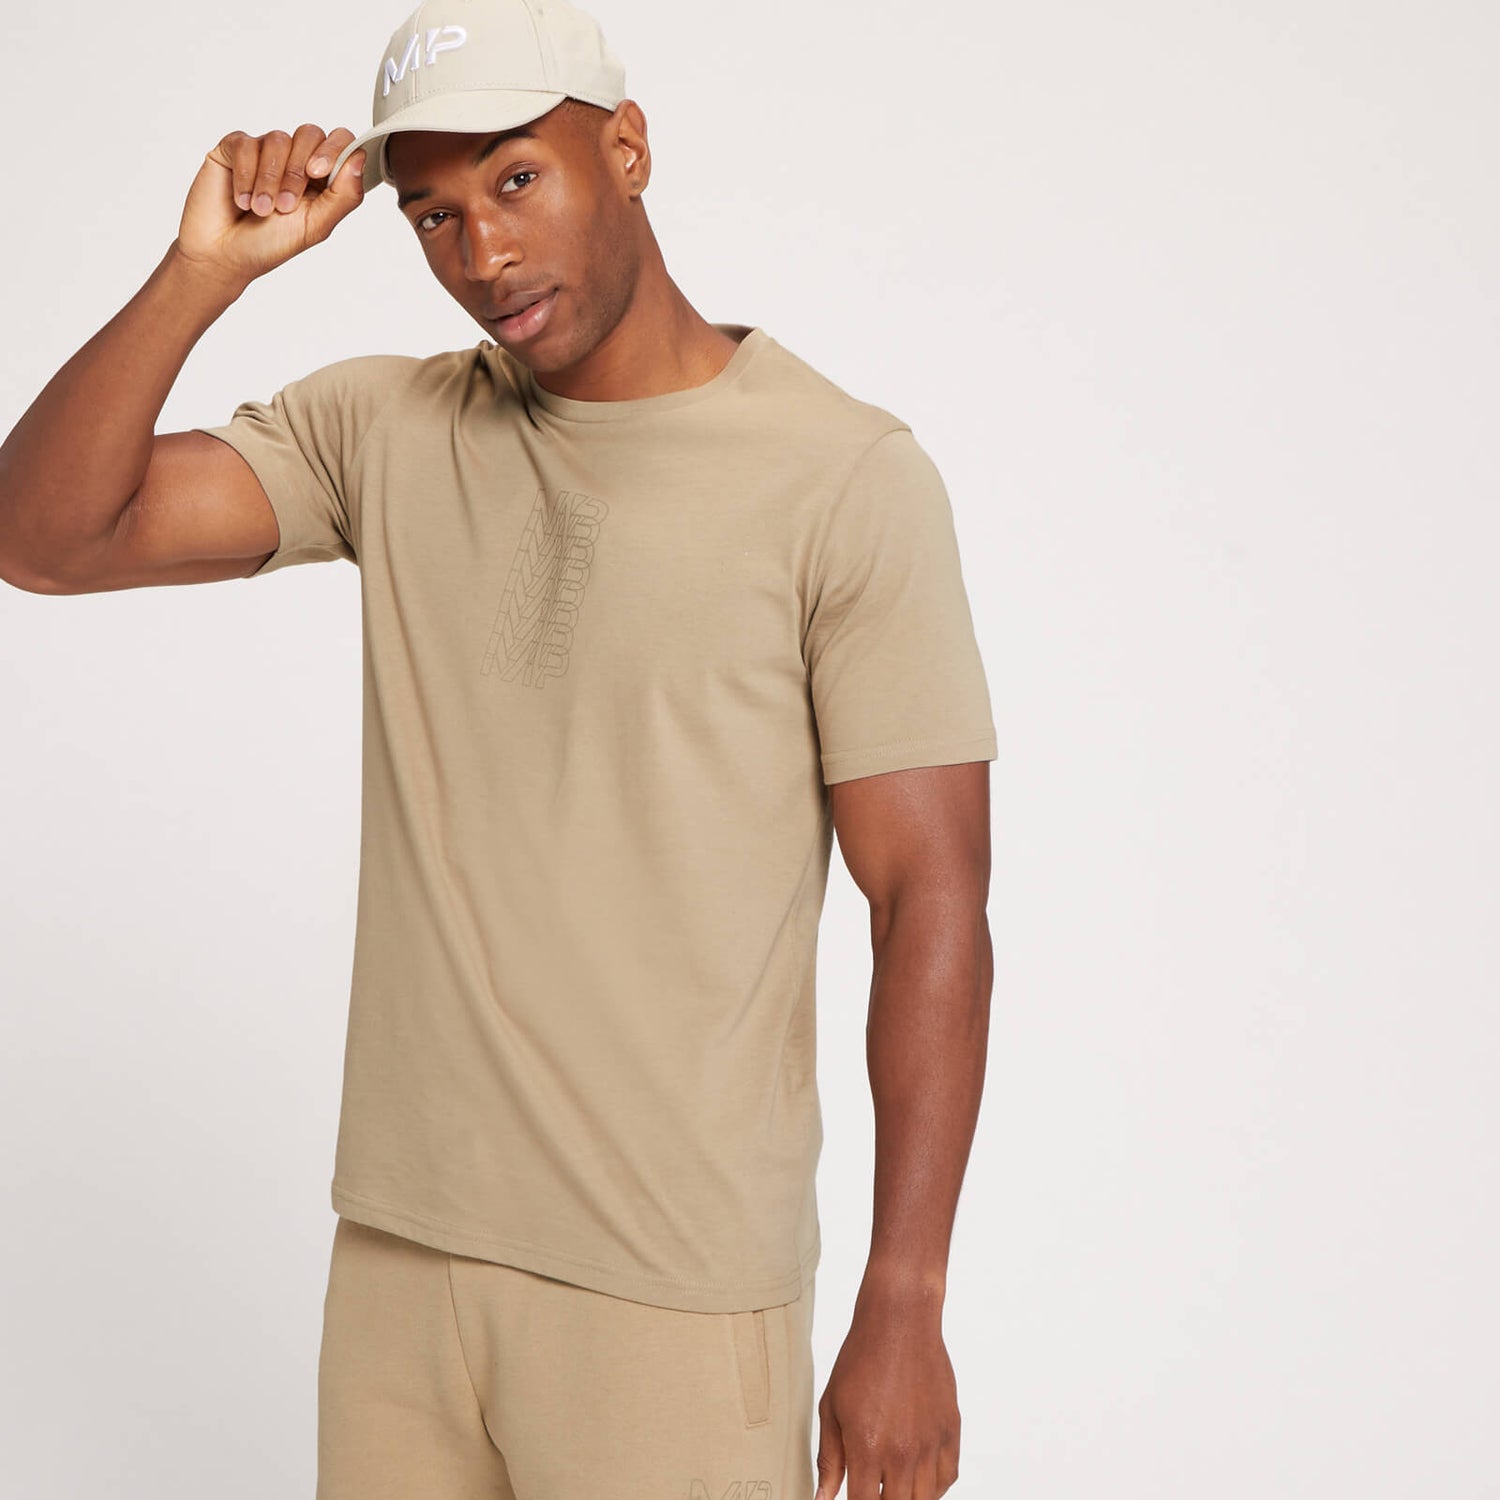 MP Men's Repeat MP Graphic Short Sleeve T-Shirt - Taupe - XXS